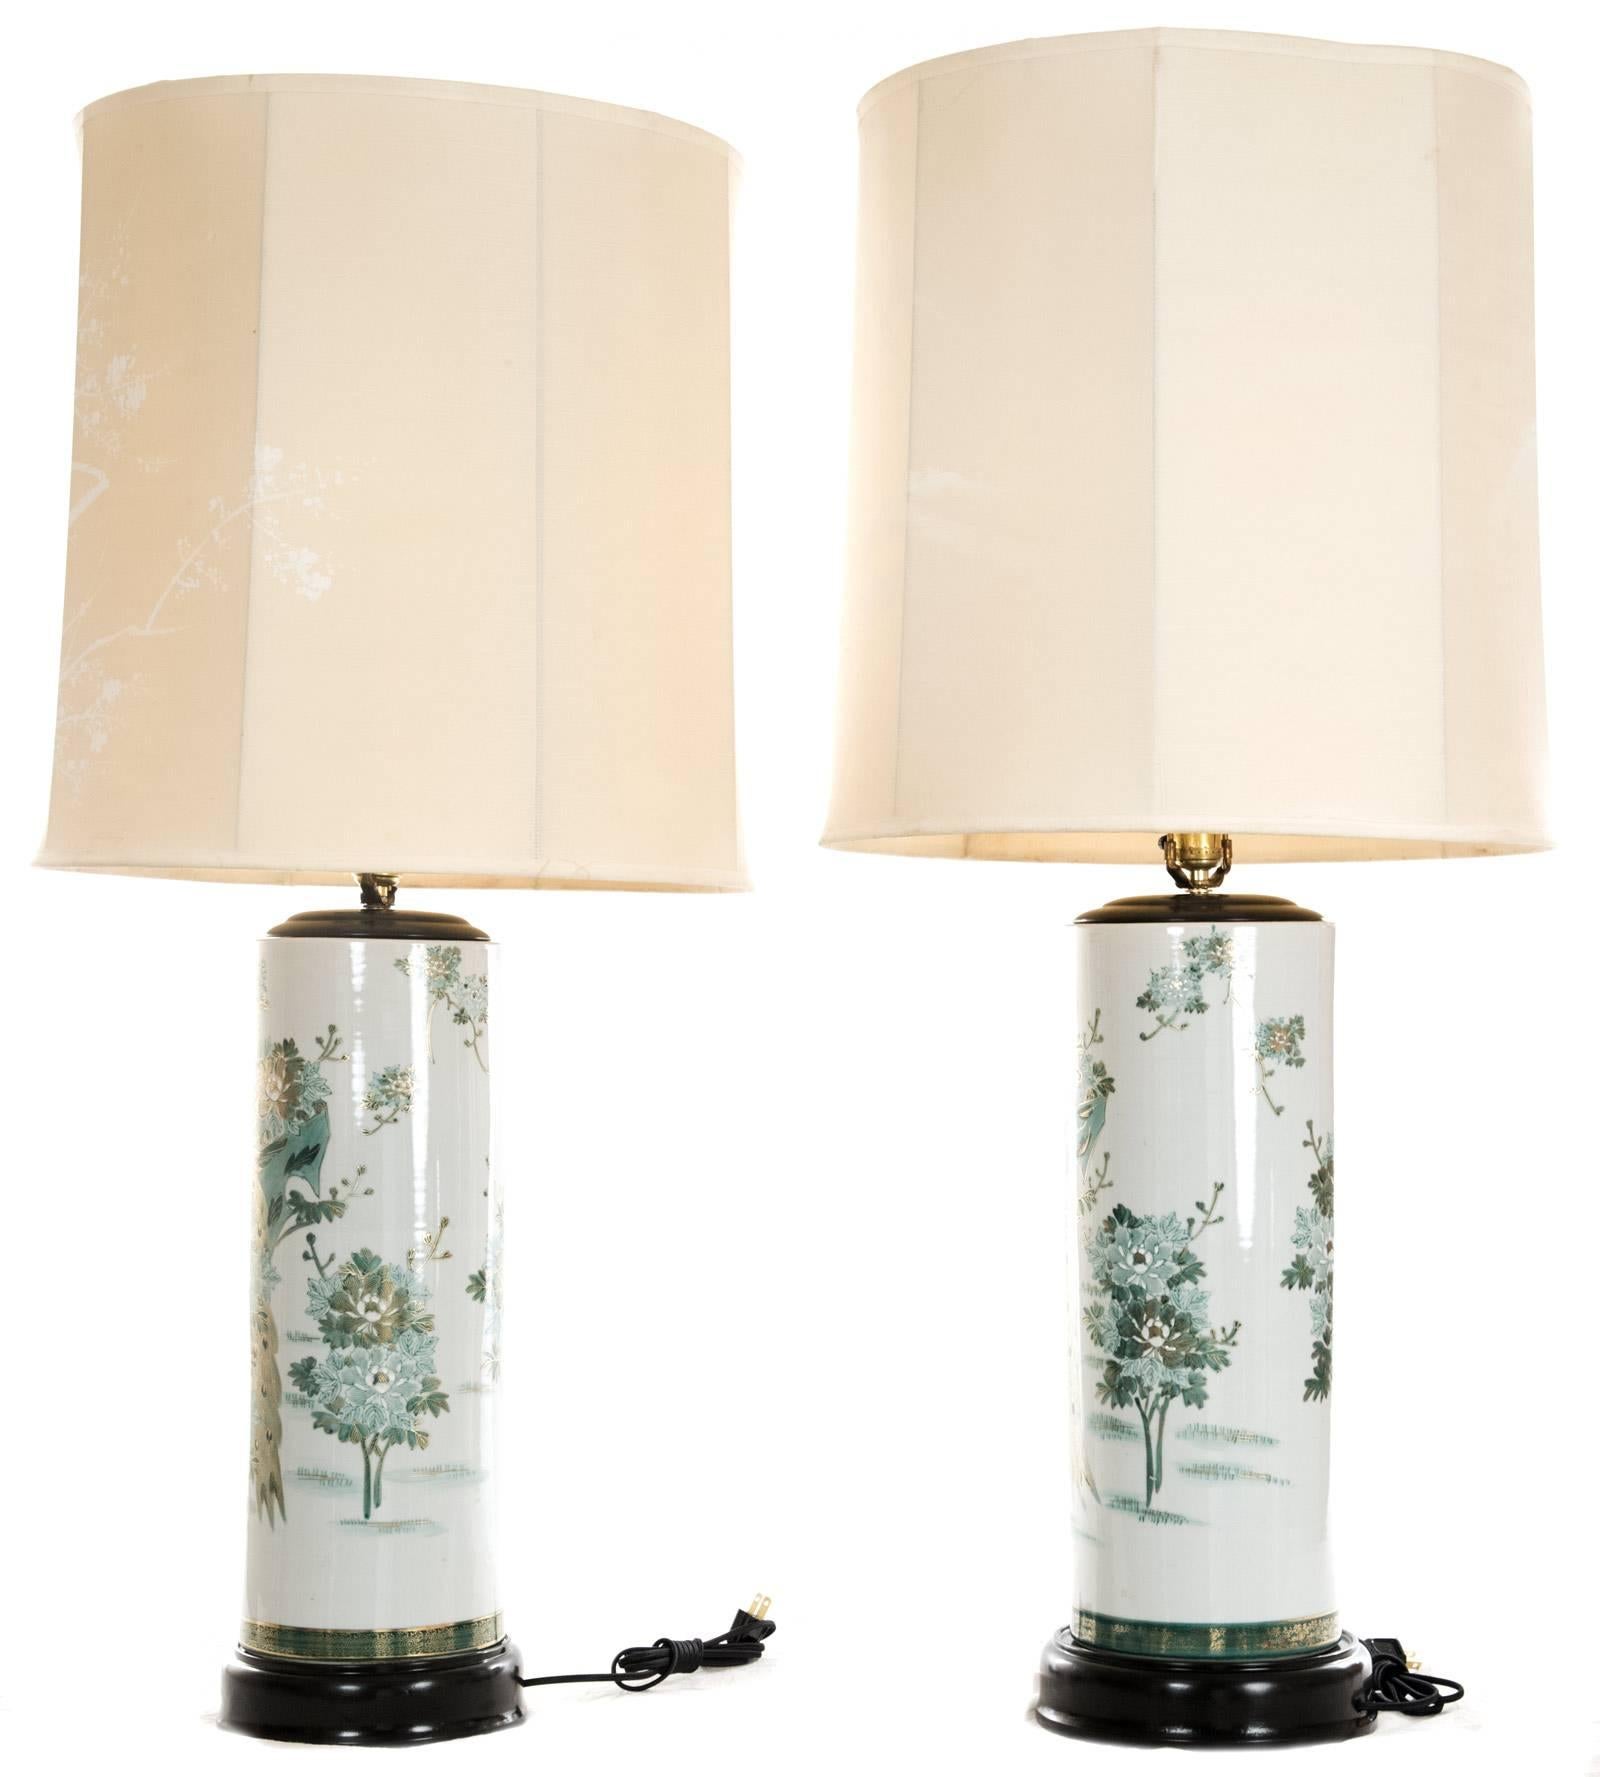 A pair of Japanese Kutani porcelain table lamps of cylindrical form with hand-painted decoration in tones of green with gold-enhanced details and highlights depicting peacocks amongst lush florals, mounted on an ebonized wood base. The tall drum